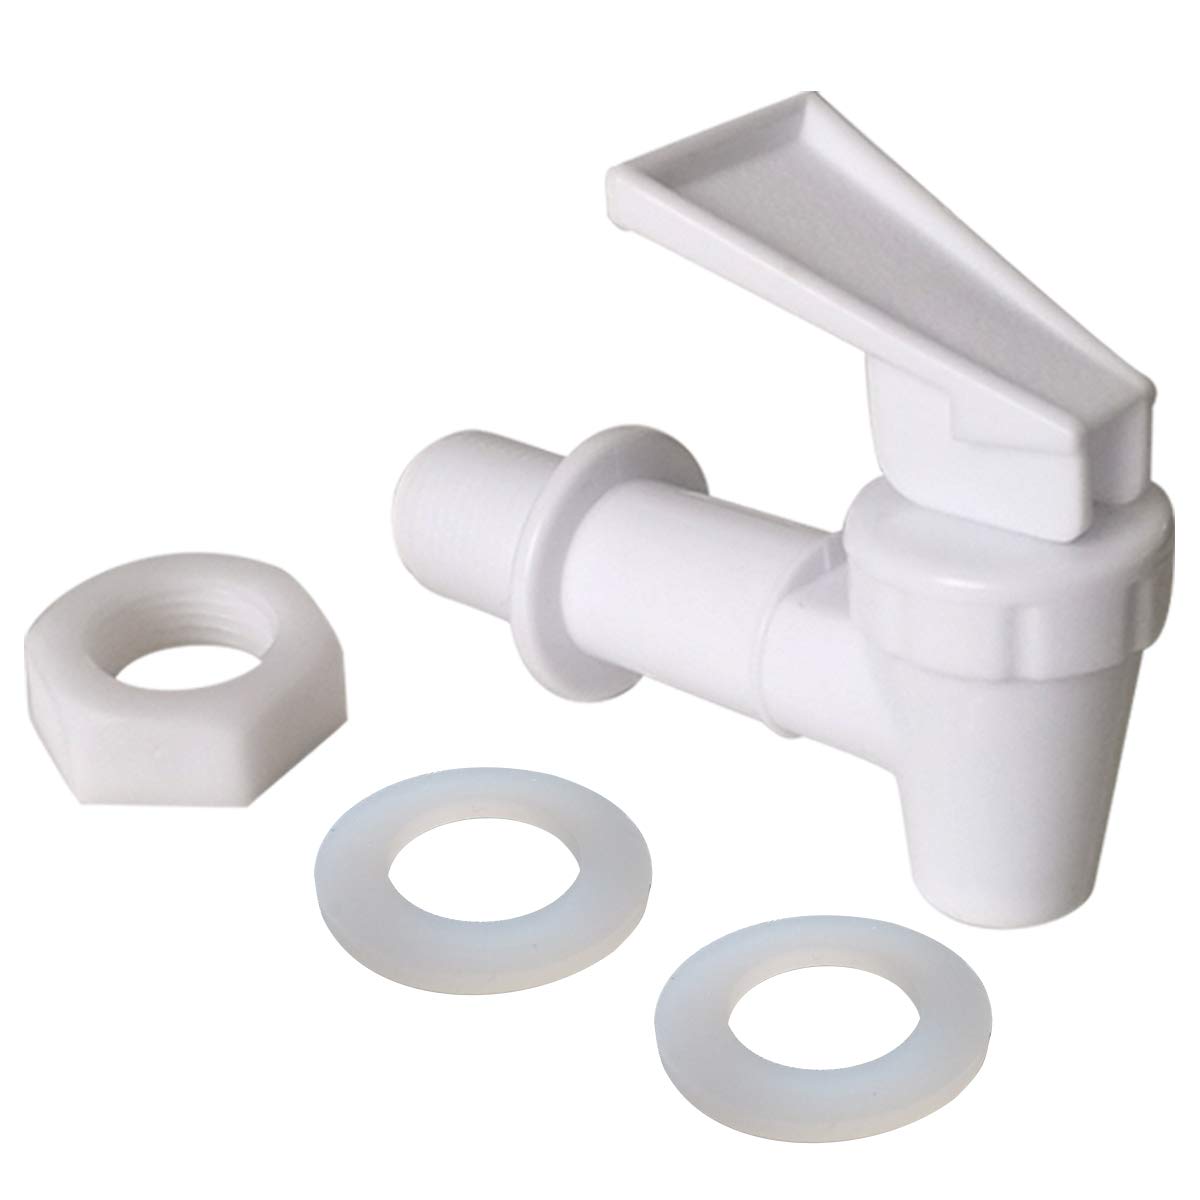 Replacement Cooler Faucet 2 White and 2 Blue Water Dispenser Tap Set. BPA Free Plastic Spigot..